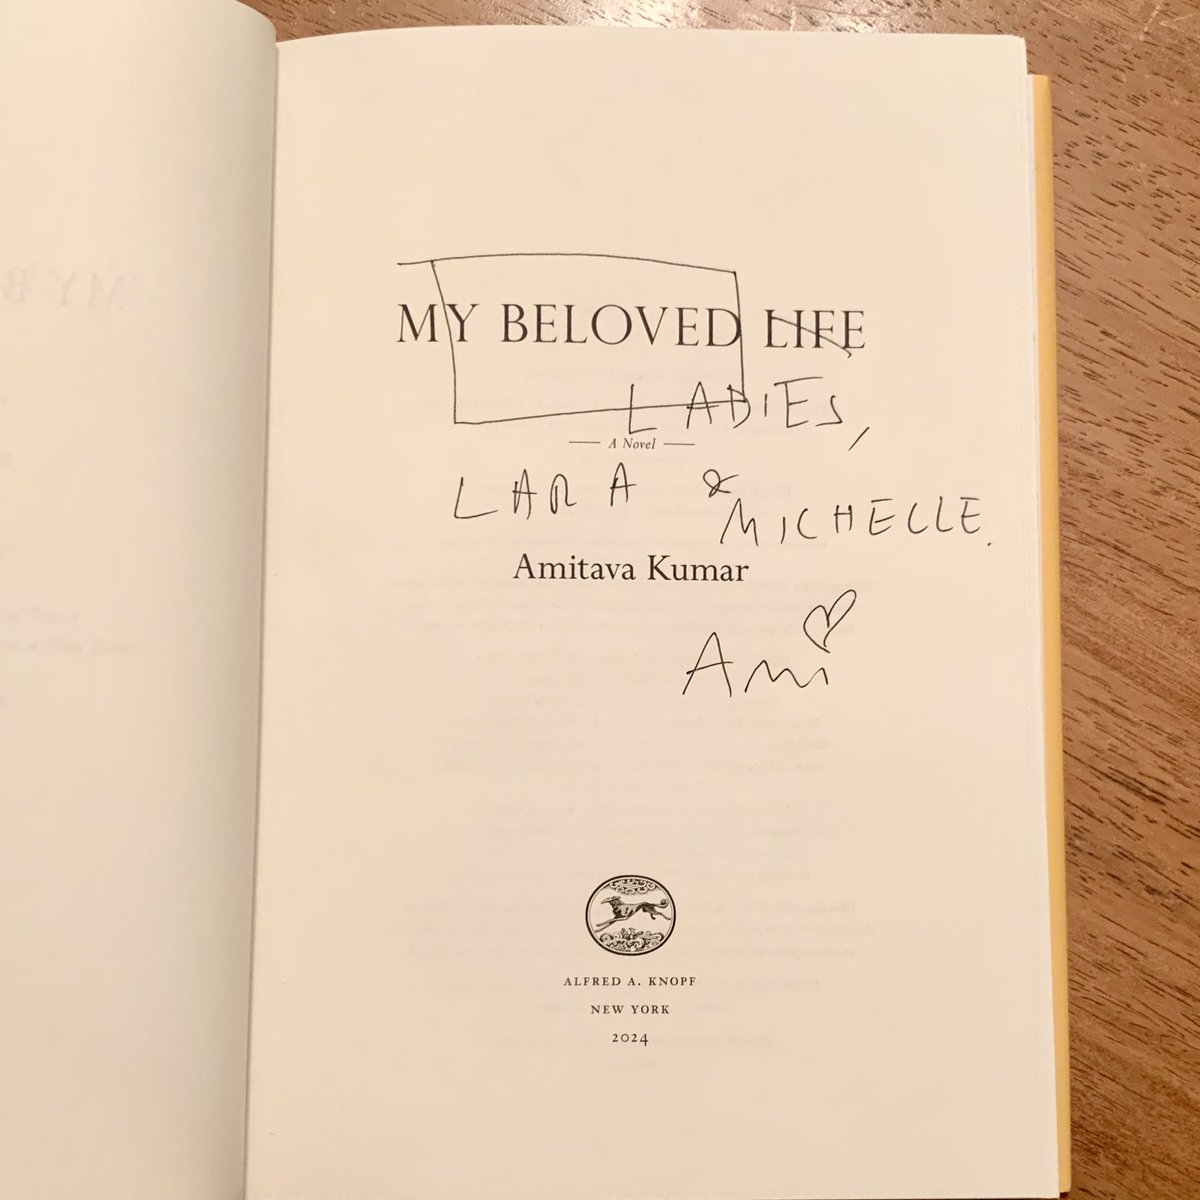 So great to celebrate the launch of Amitava Kumar's new book! I loved hearing about the inspiration behind the storytelling, and can't wait to dive right in. Congratulations, Ami!! 📚 @amitavakumar @OblongBooks : #keepreading #readwriteilovebookstores #mybelovedlife #cheers